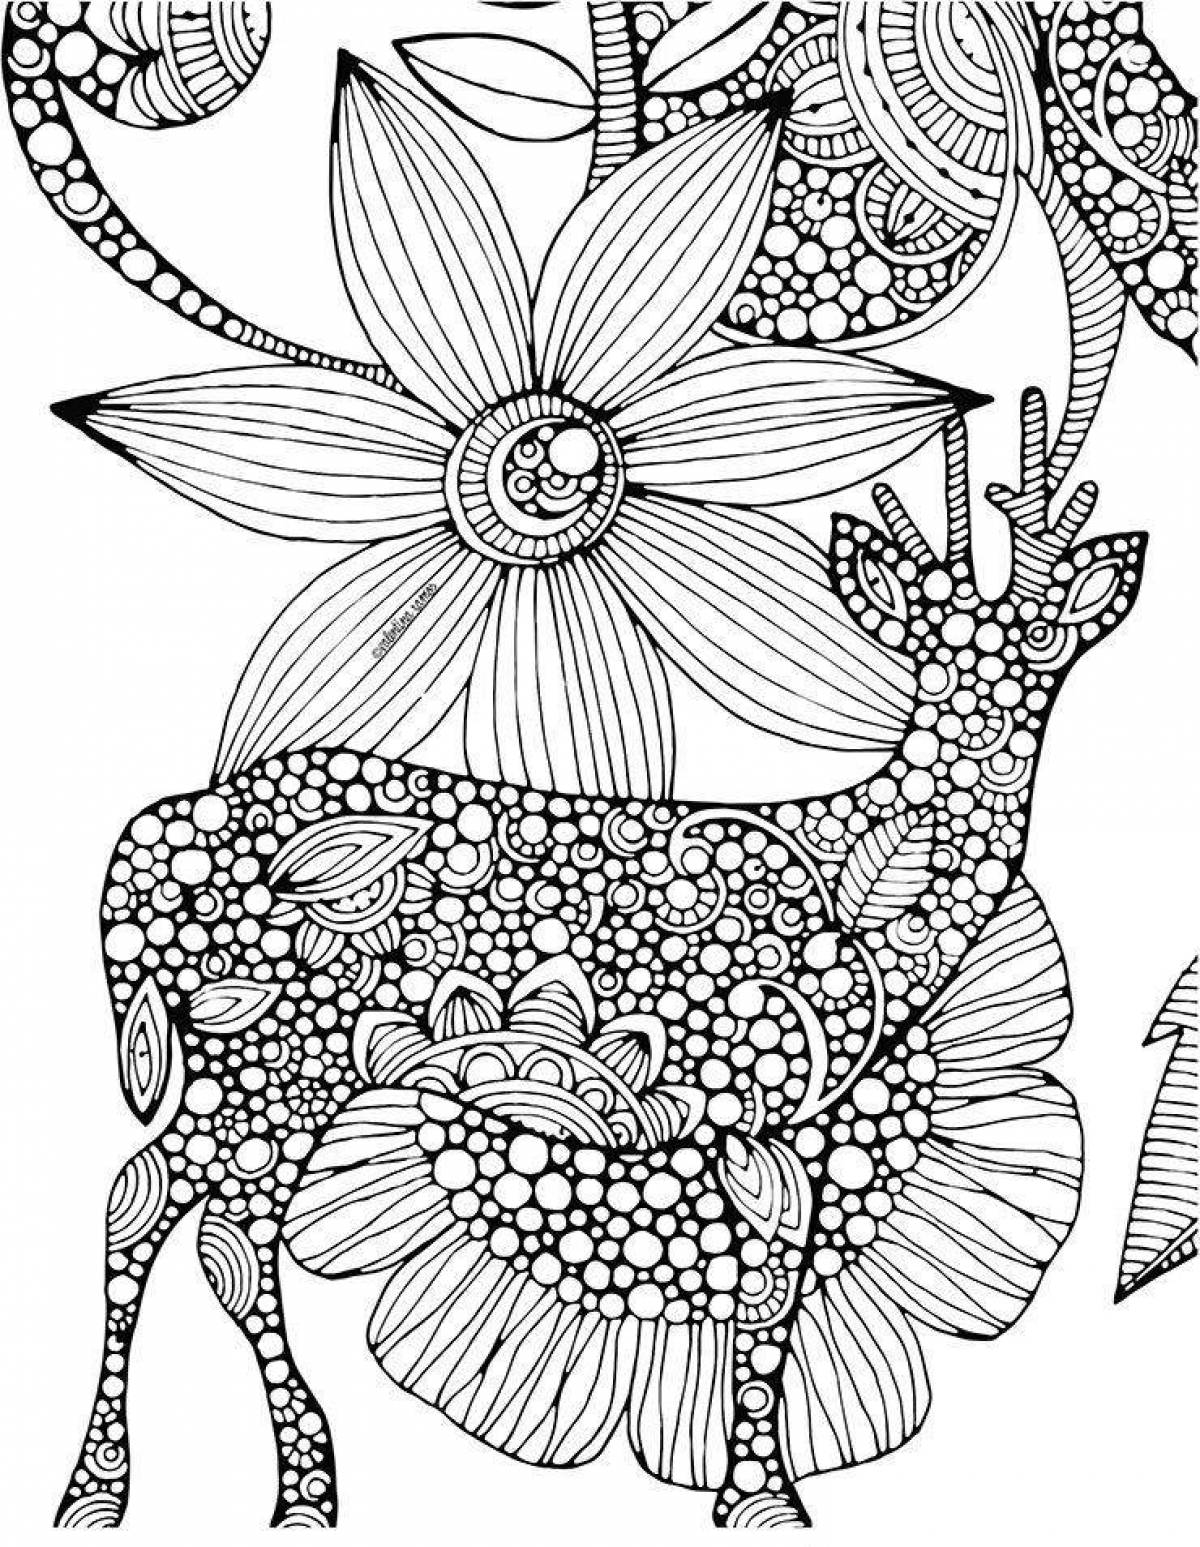 Exciting coloring color therapy